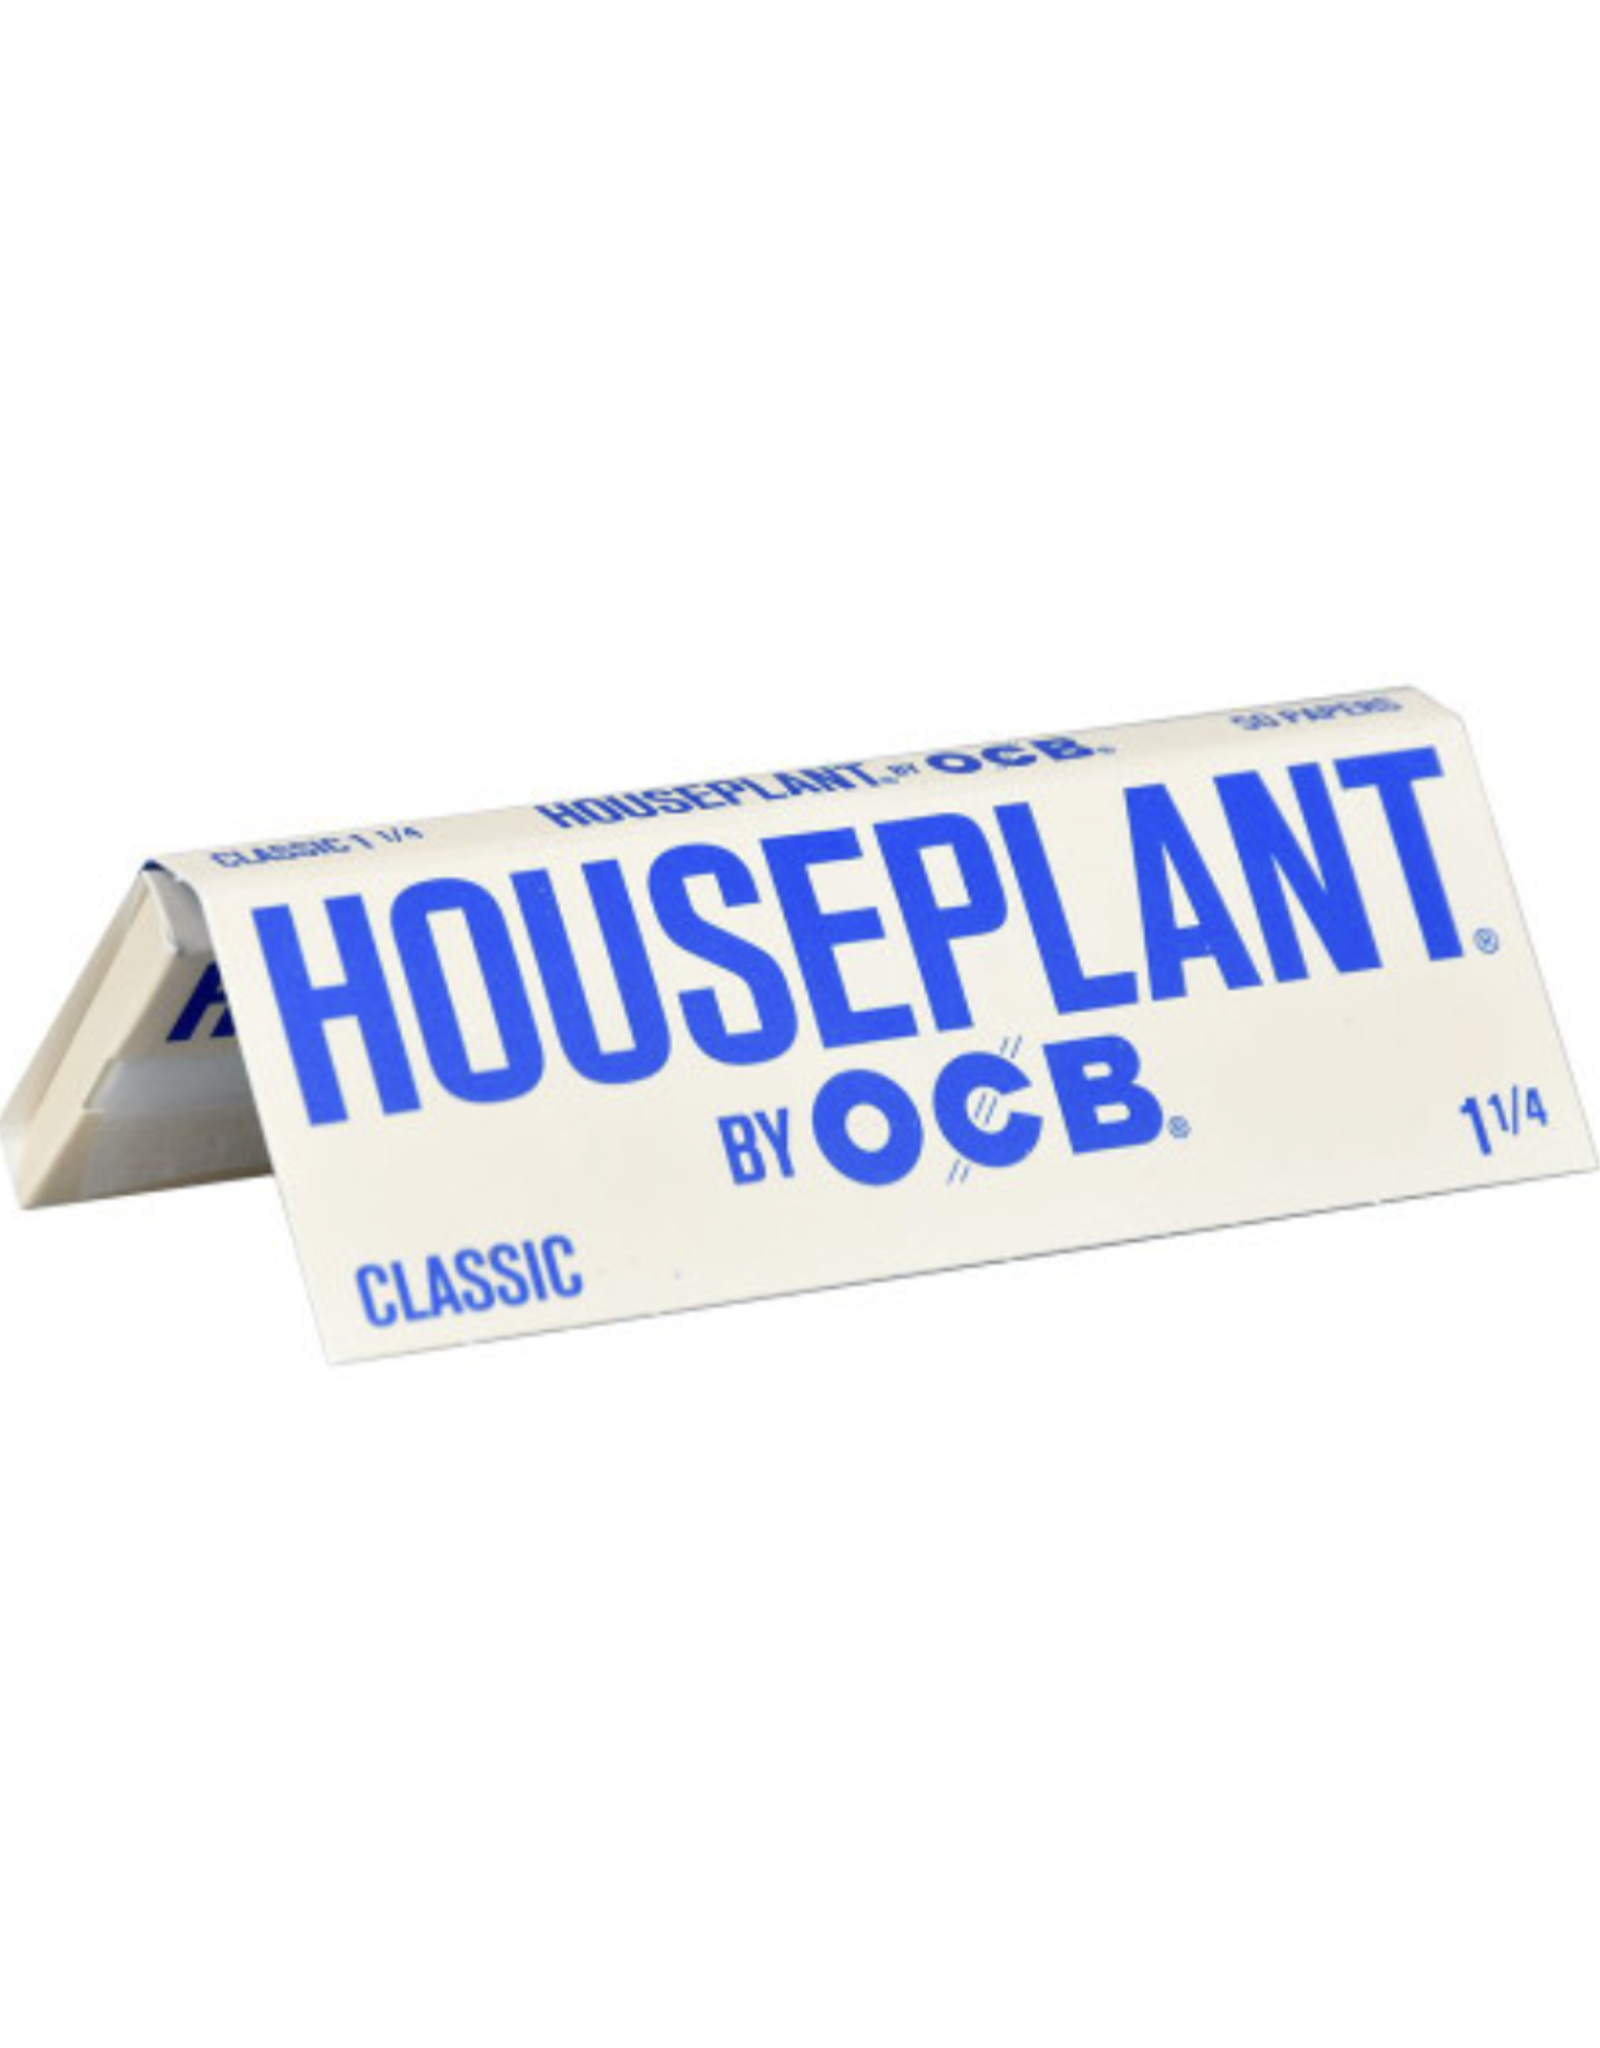 OCB Houseplant by OCB Classic 1.25 Rolling Papers - 50 Papers/Pack